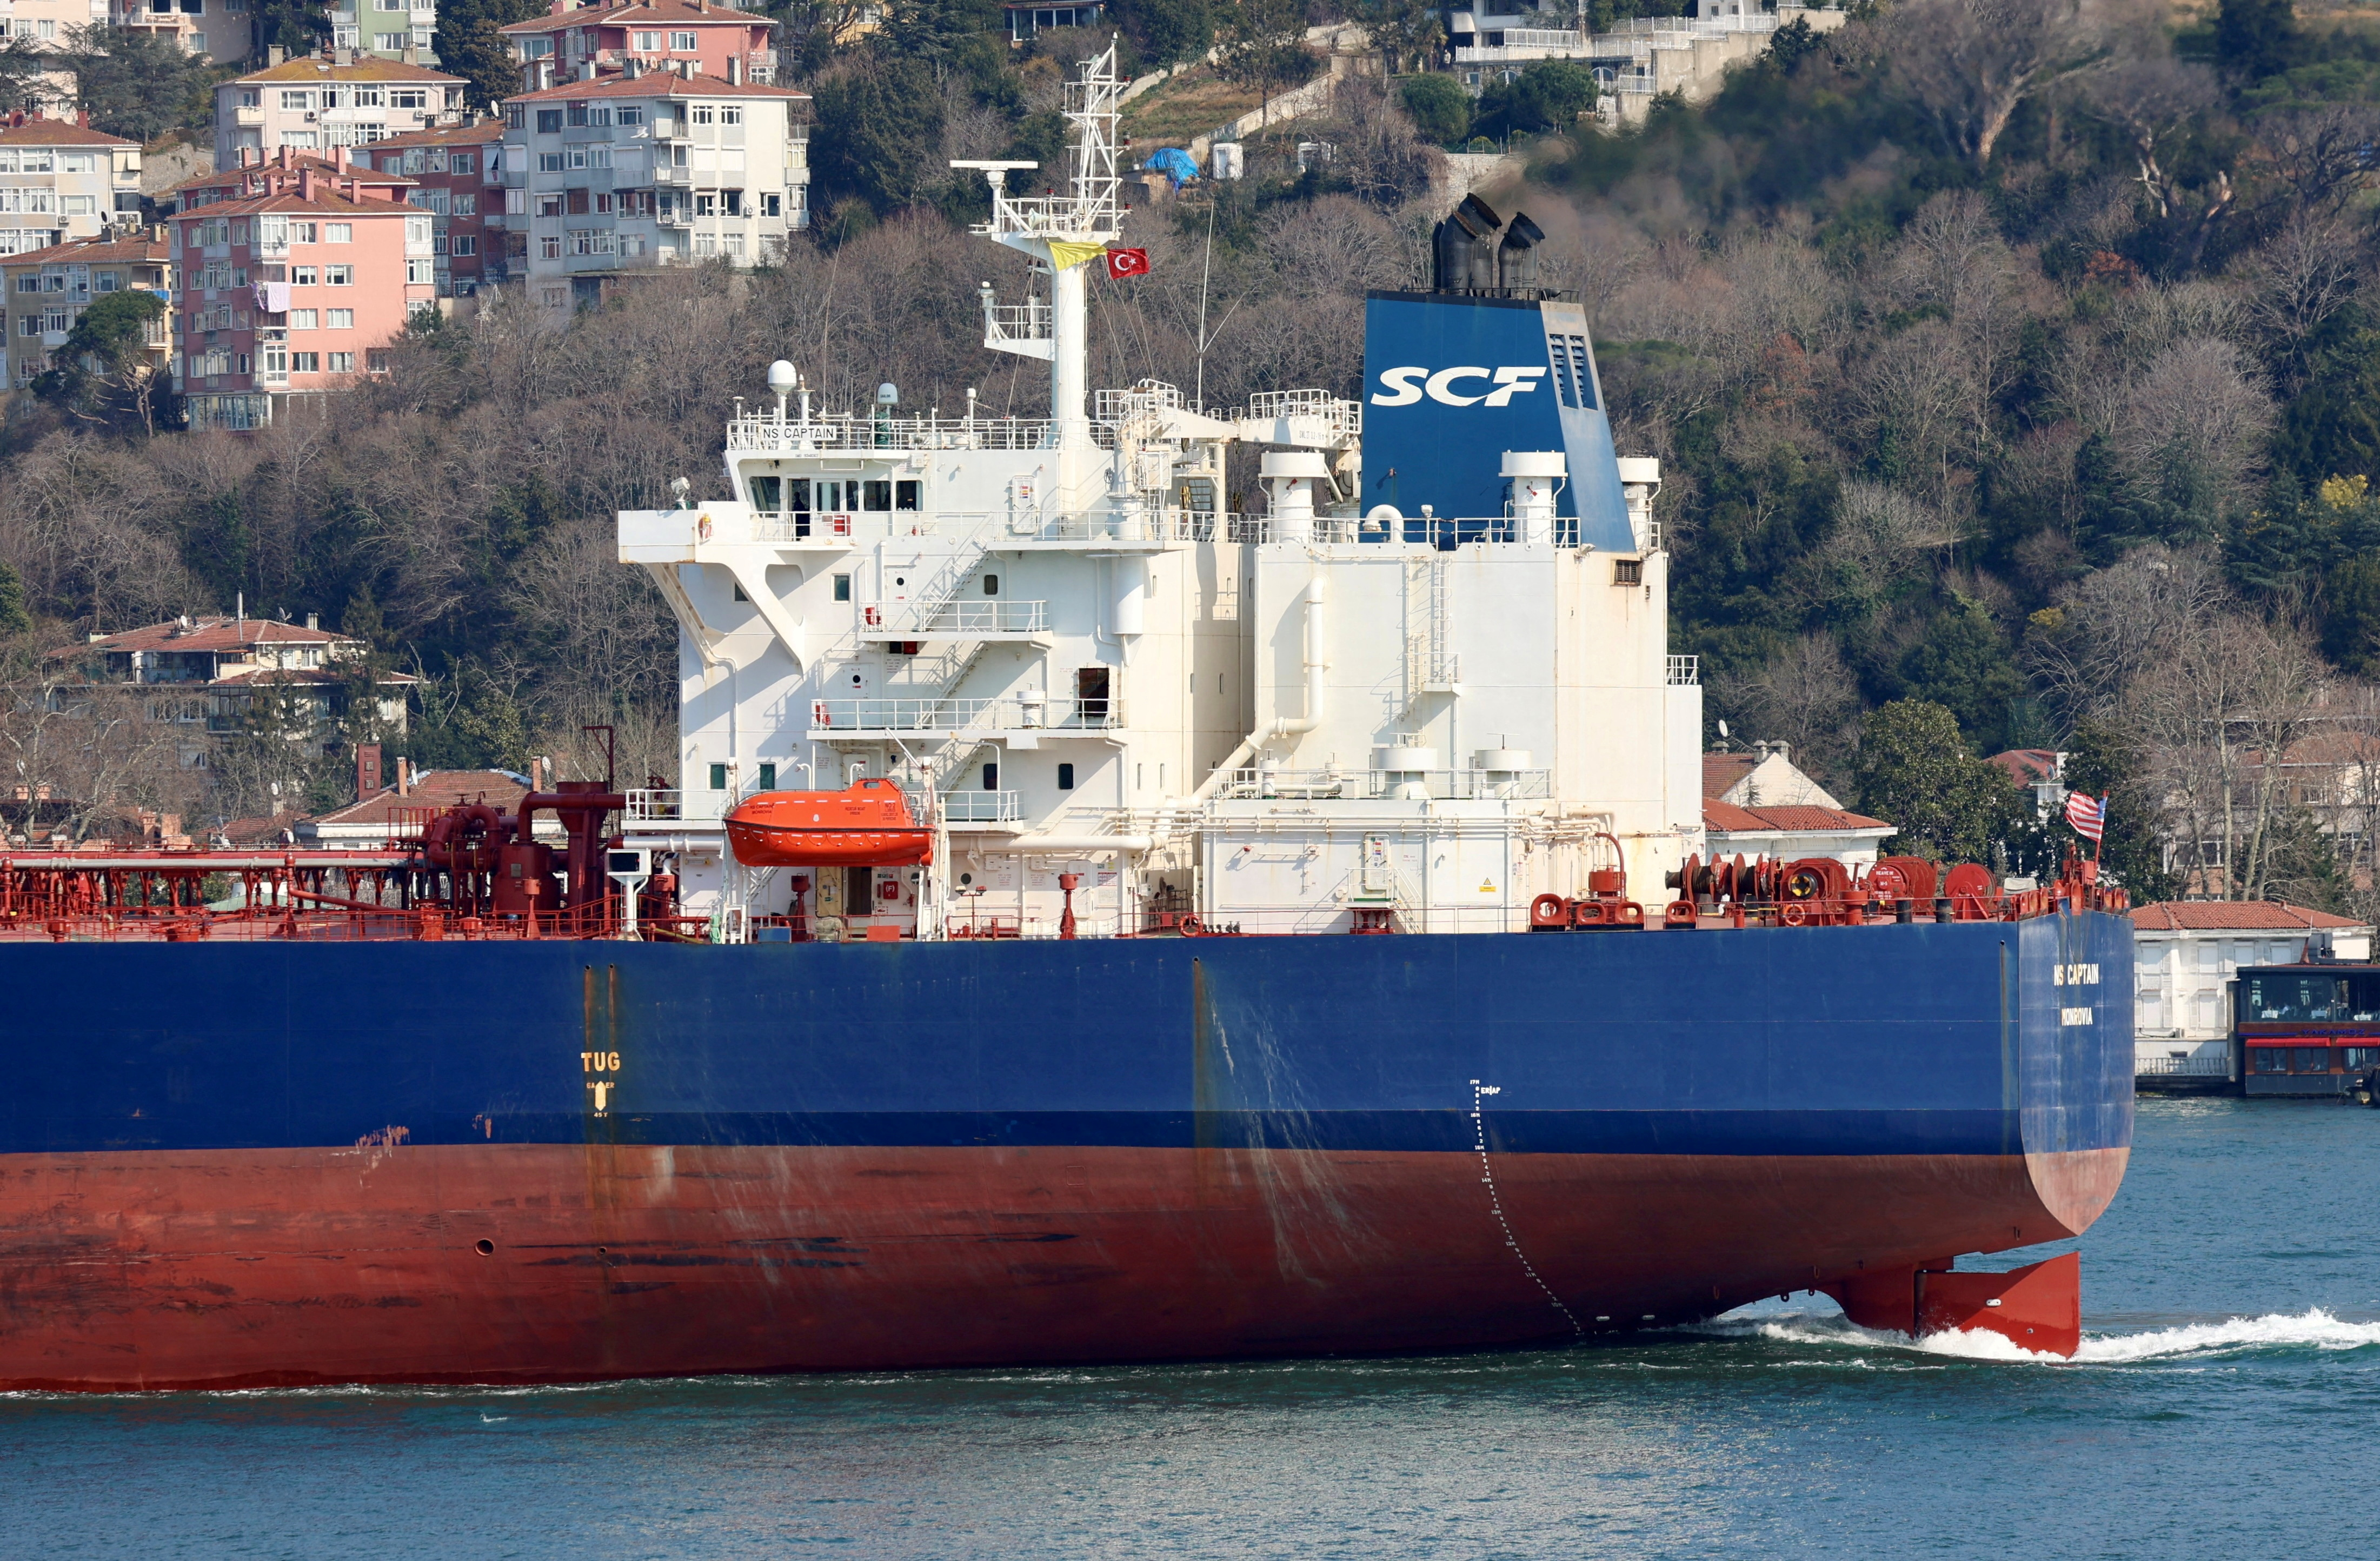 Liberia-flagged crude oil tanker NS Captain, owned by Russia's leading tanker group Sovcomflot, transits the Bosphorus